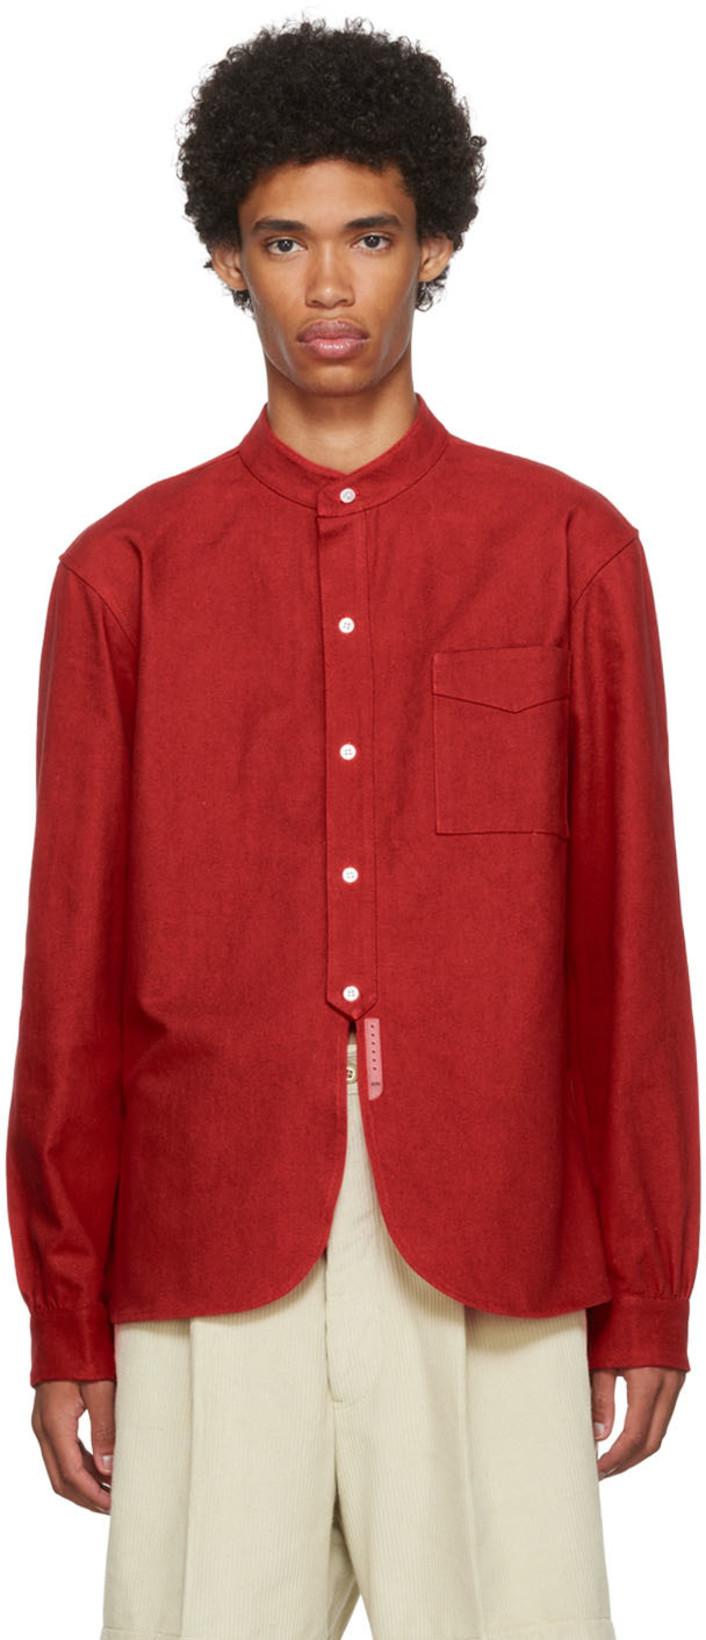 Red Work Shirt by CONNOR MC KNIGHT